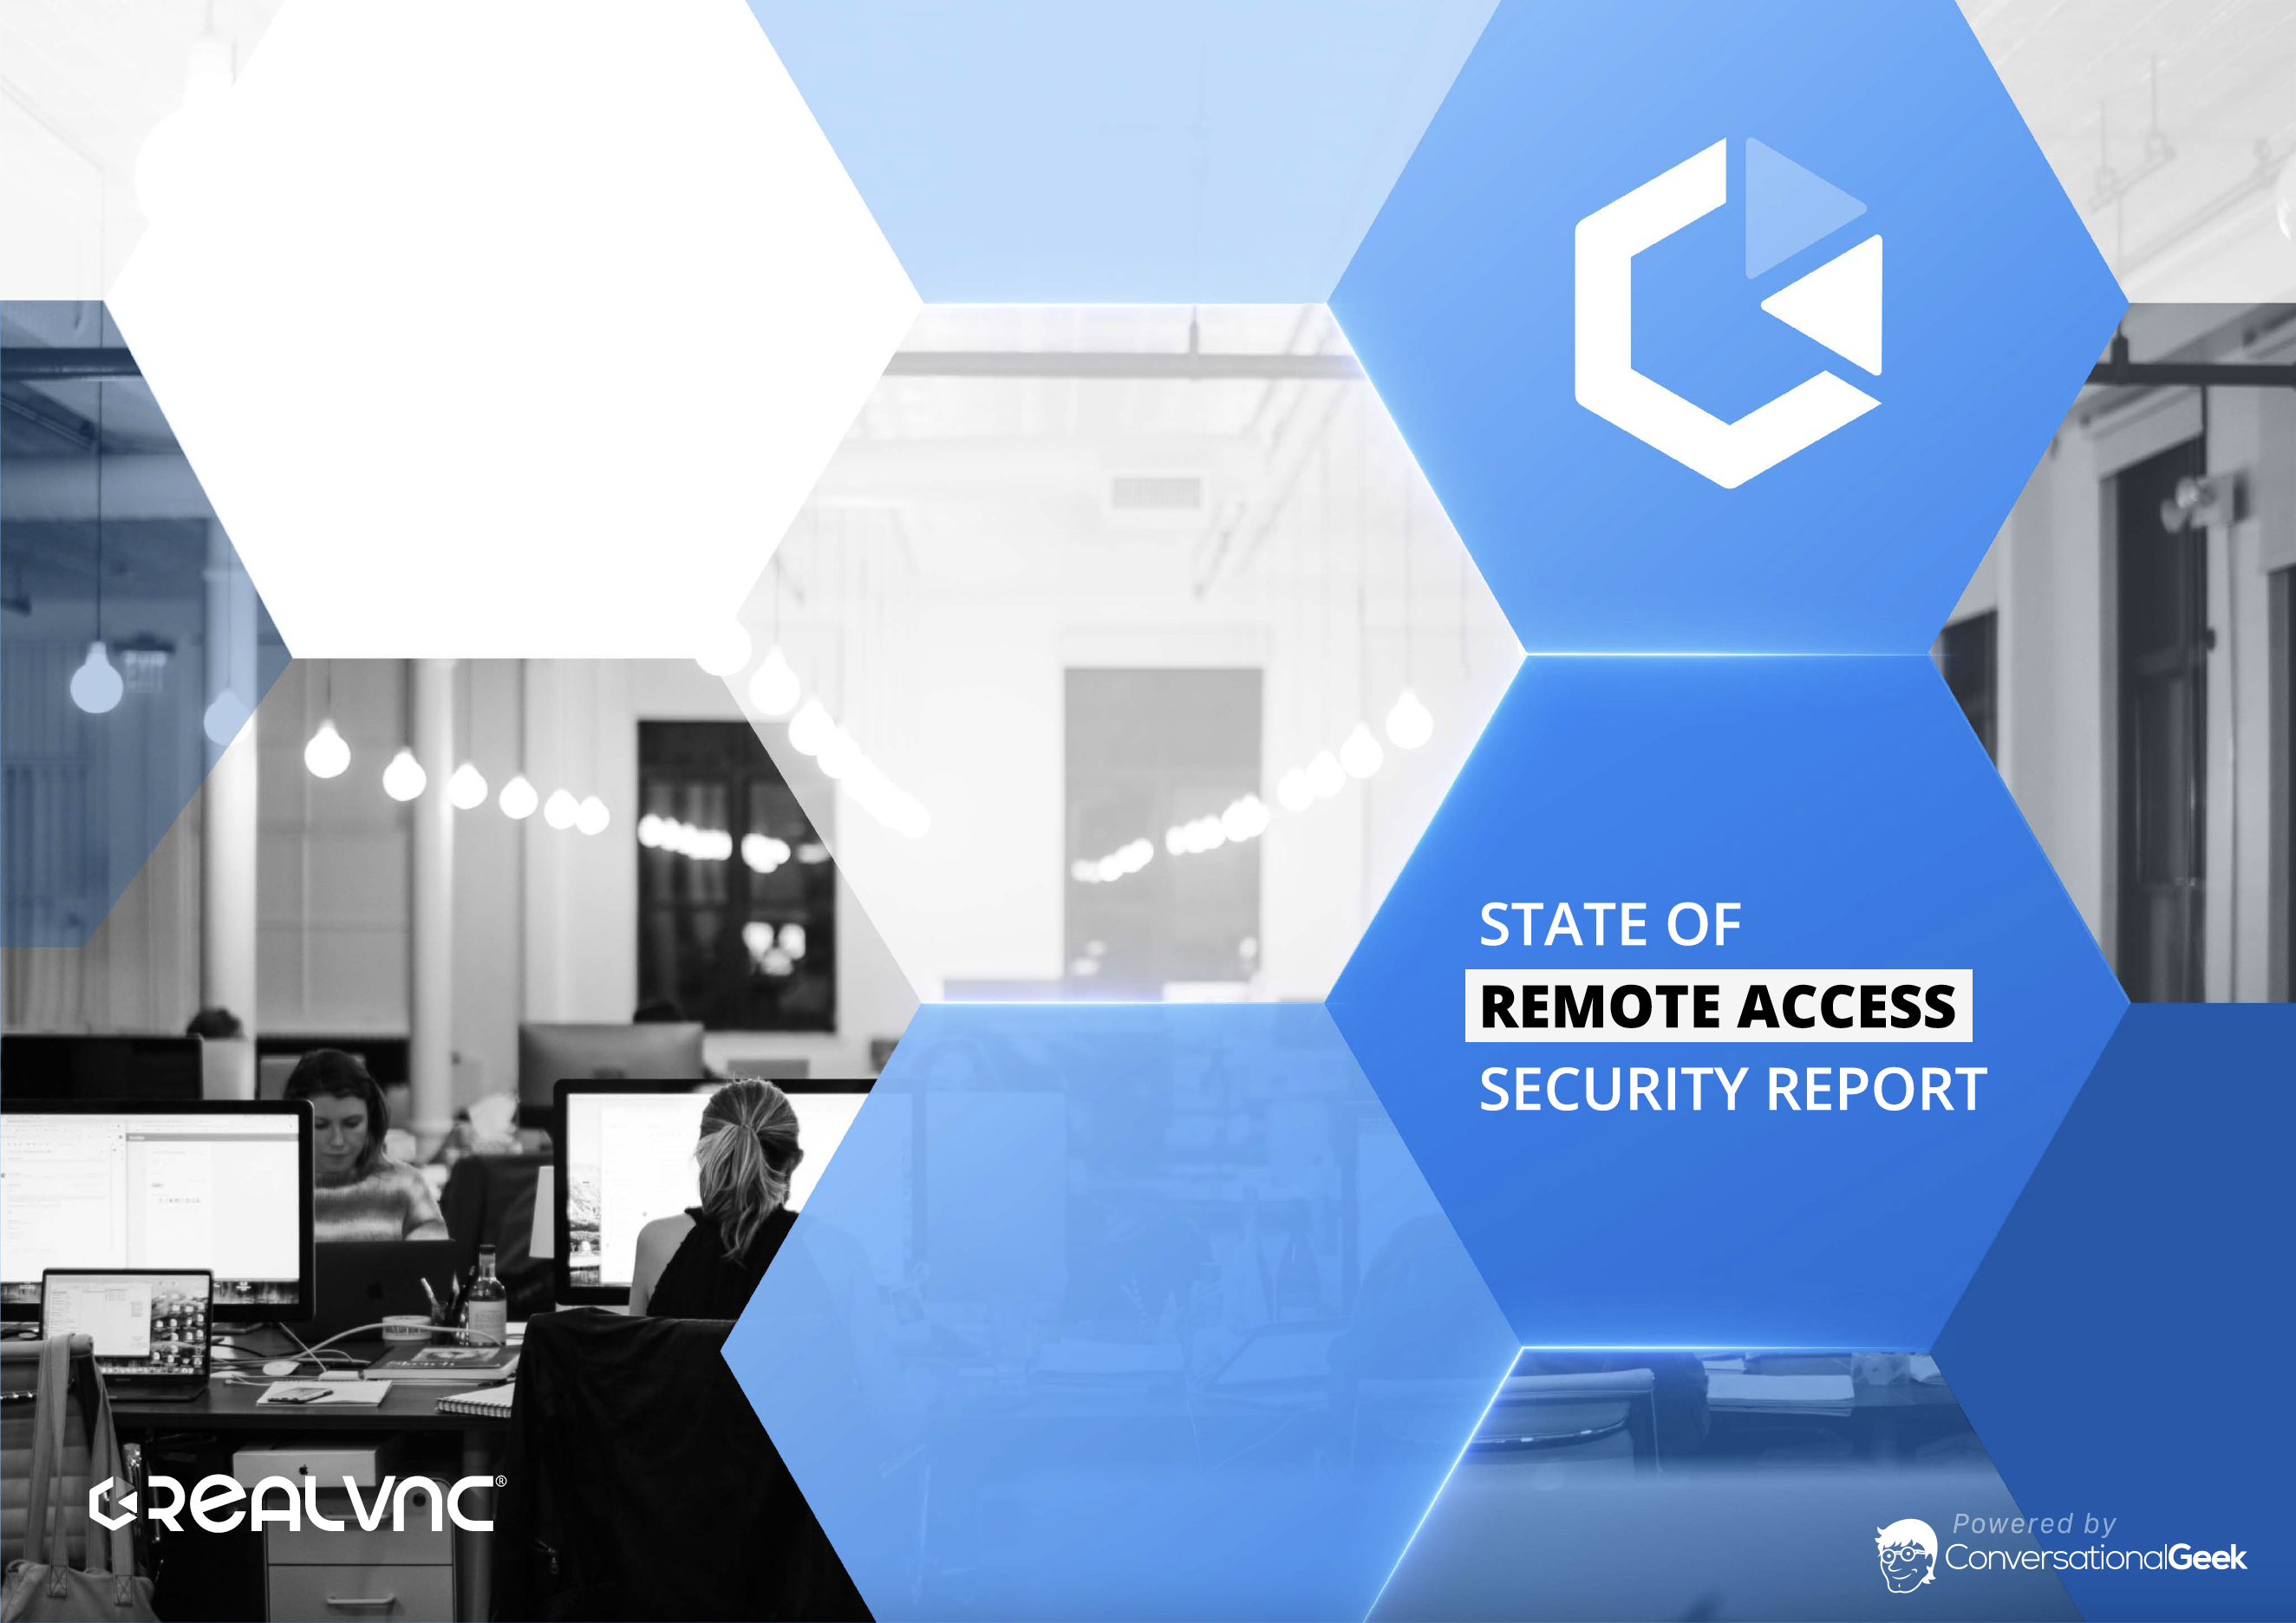 State of Remote Access Security Report